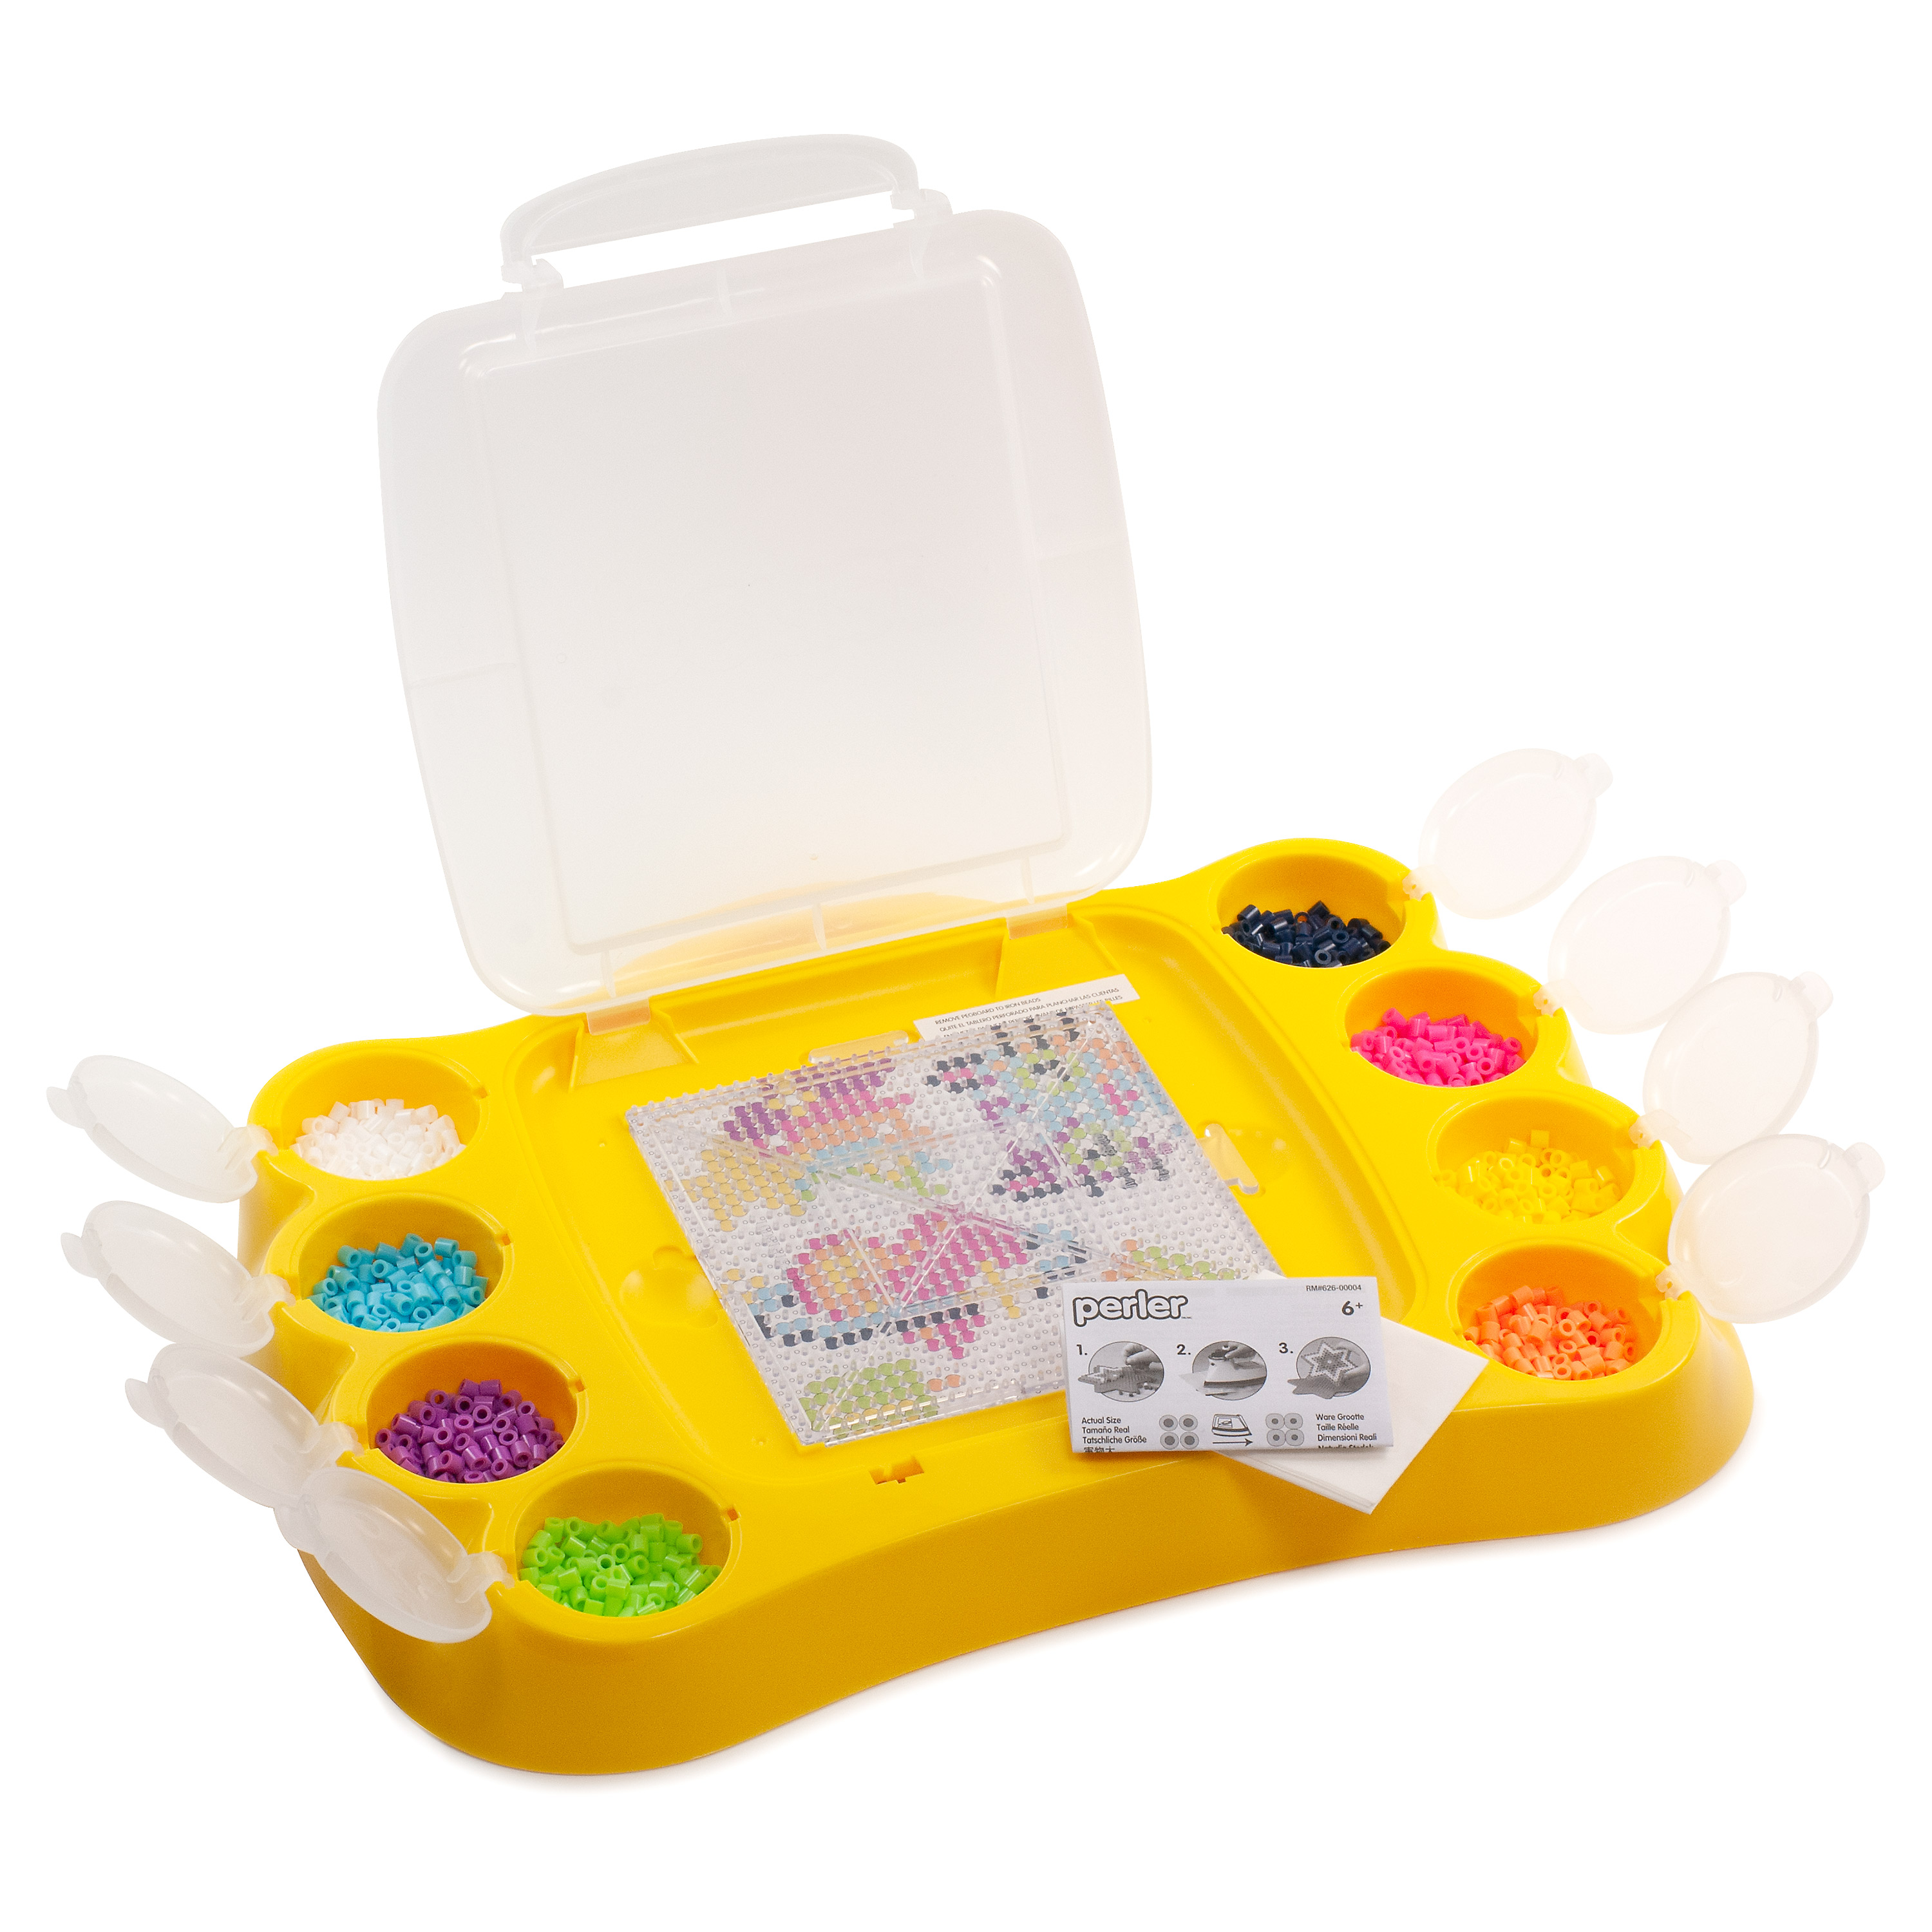 Perler Bead 'N Carry Fused Bead Activity Kit, Ages 6 and up, 1205 Pieces - image 1 of 5